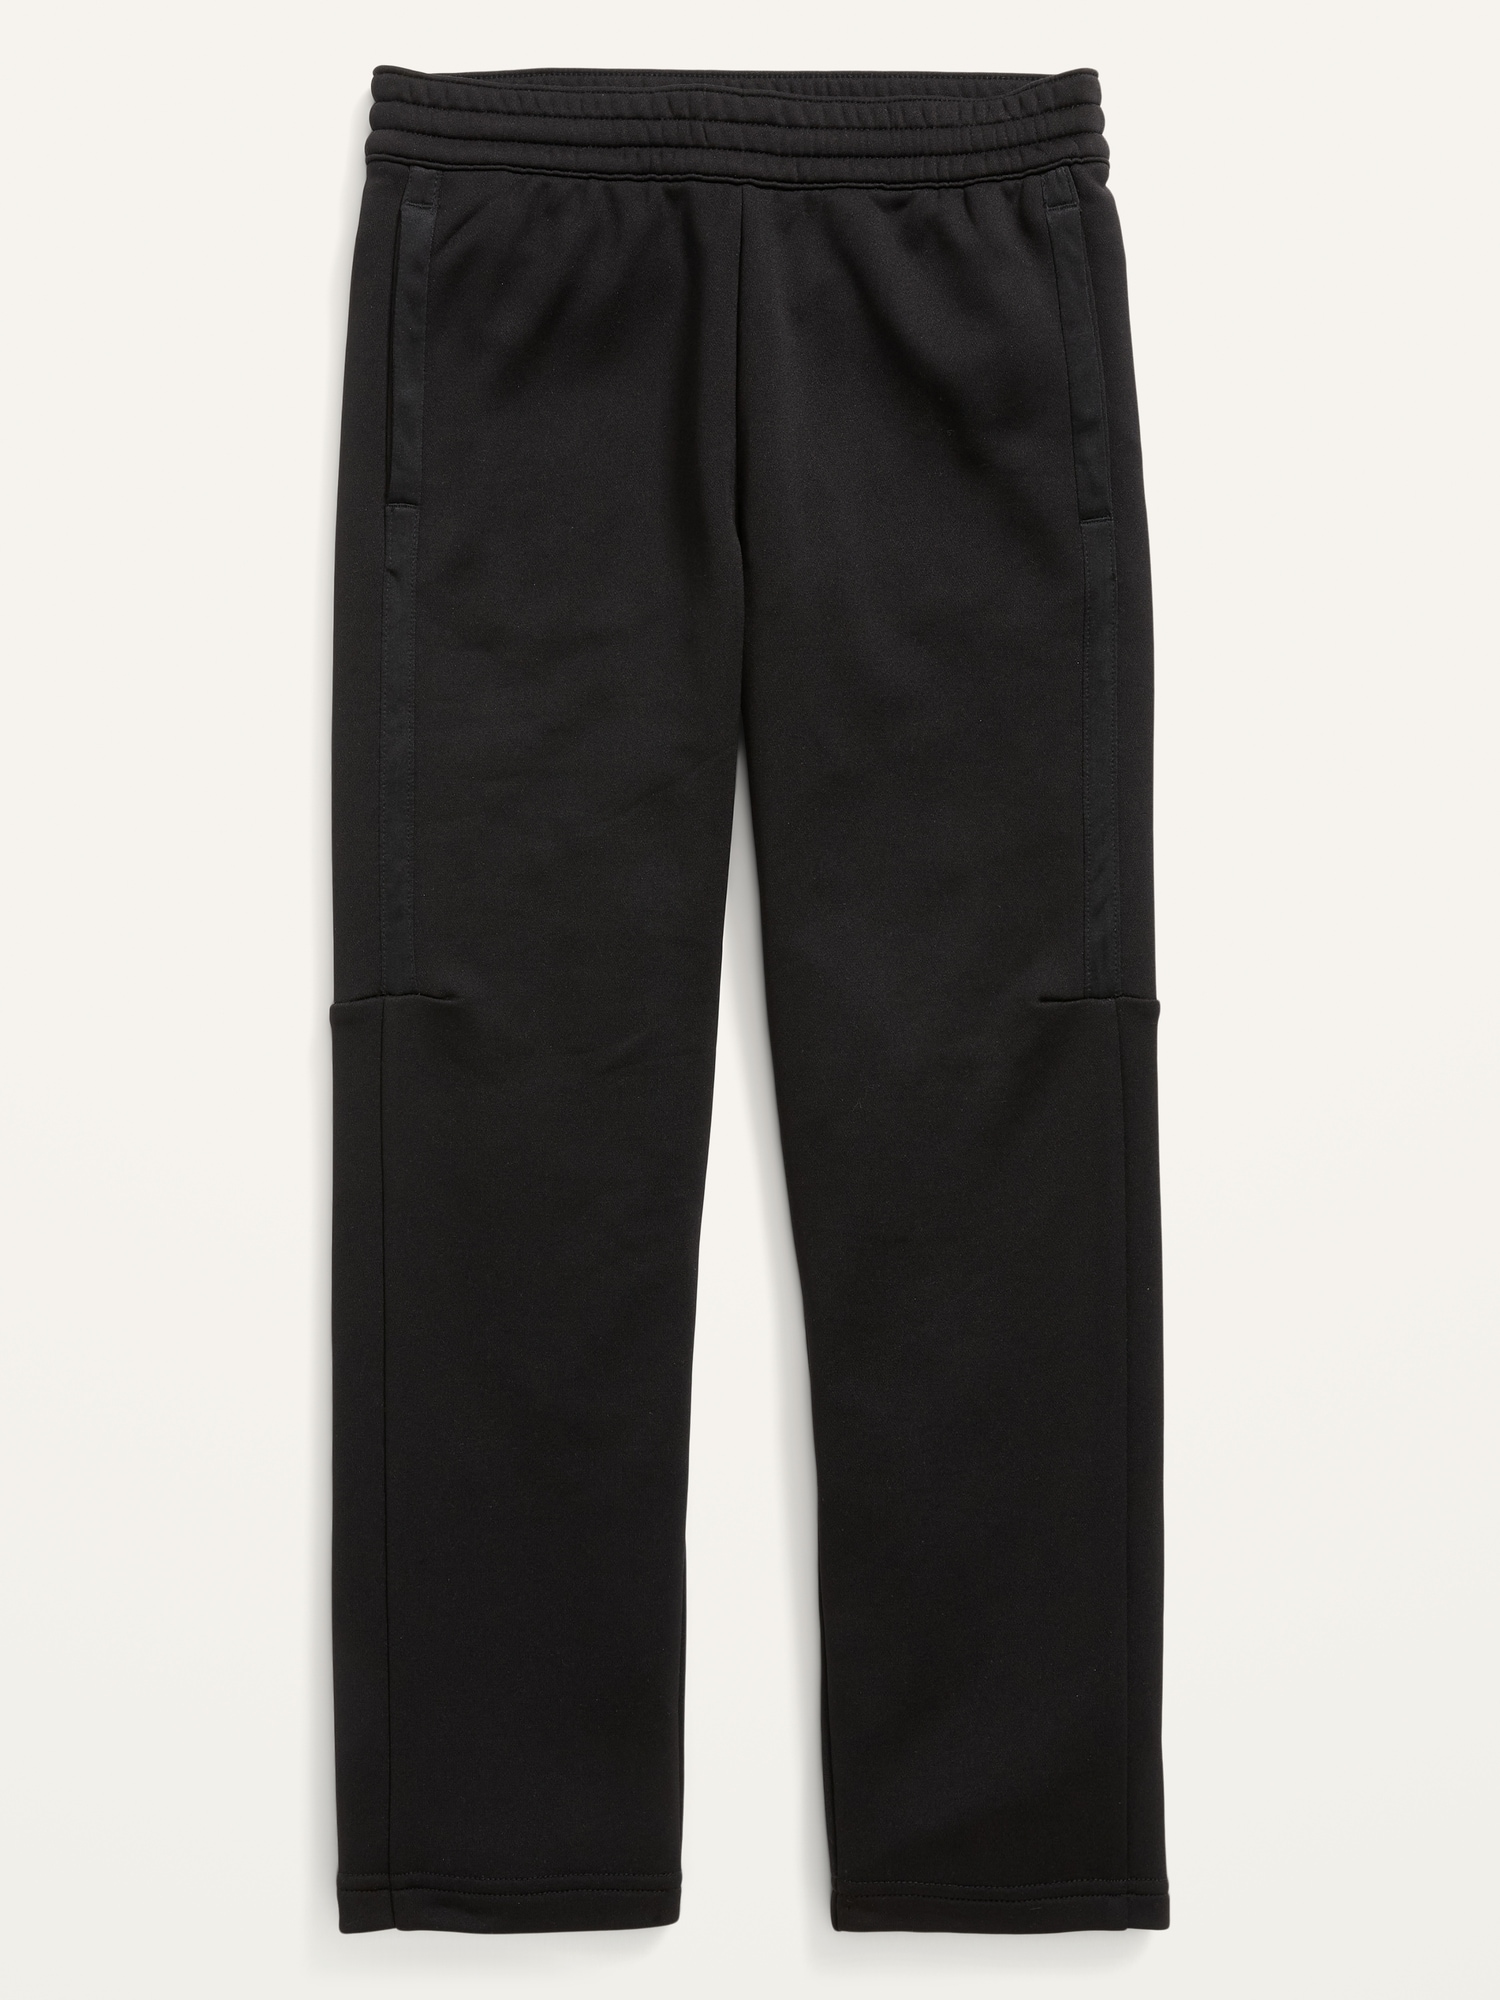 Old Navy Dynamic Fleece Tapered Sweatpants for Boys